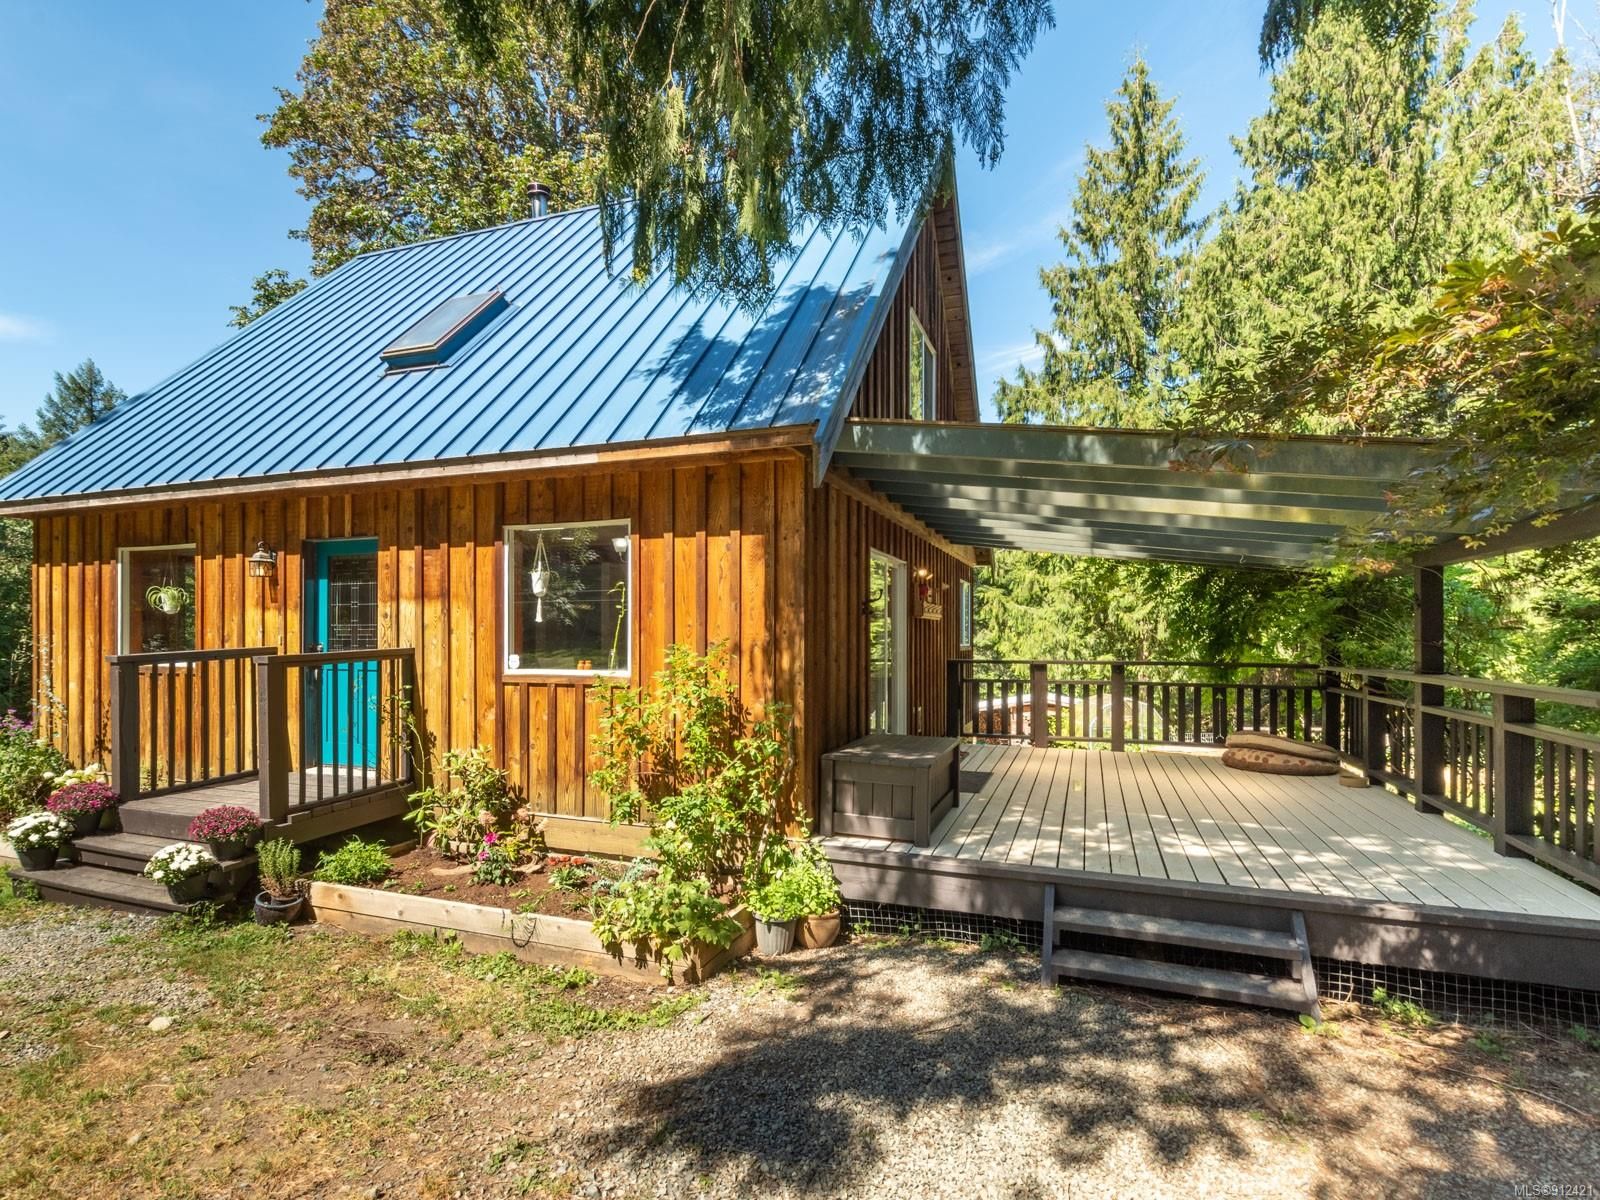 I have sold a property at 4235 Barnjum Rd in Duncan
